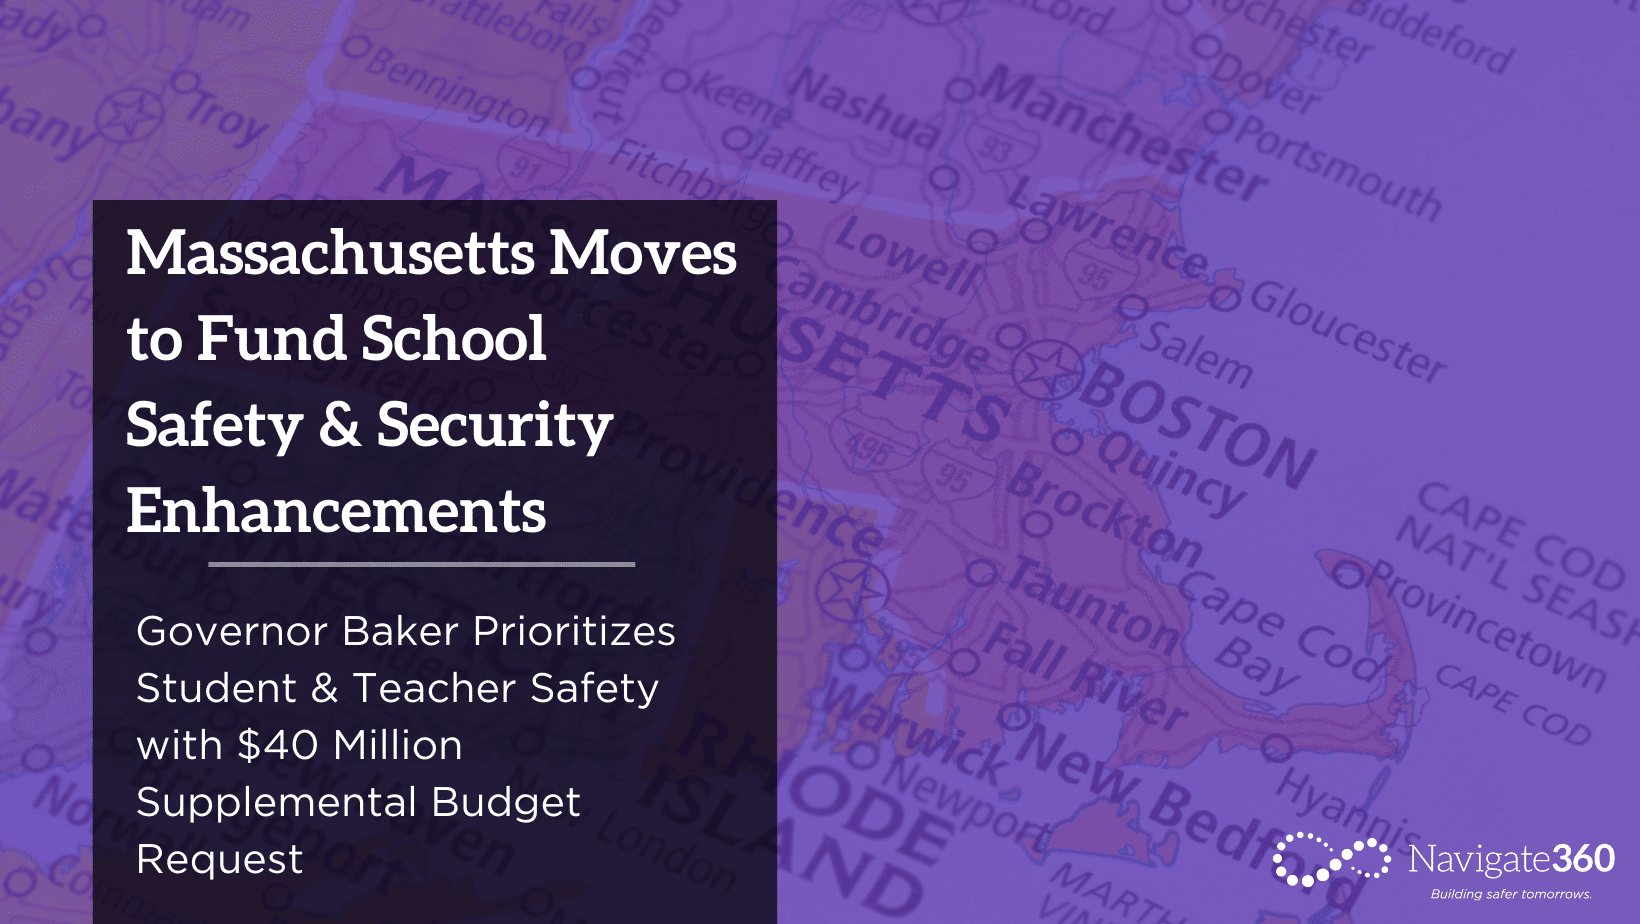 Massachusetts Moves to Fund School Safety & Security Enhancements